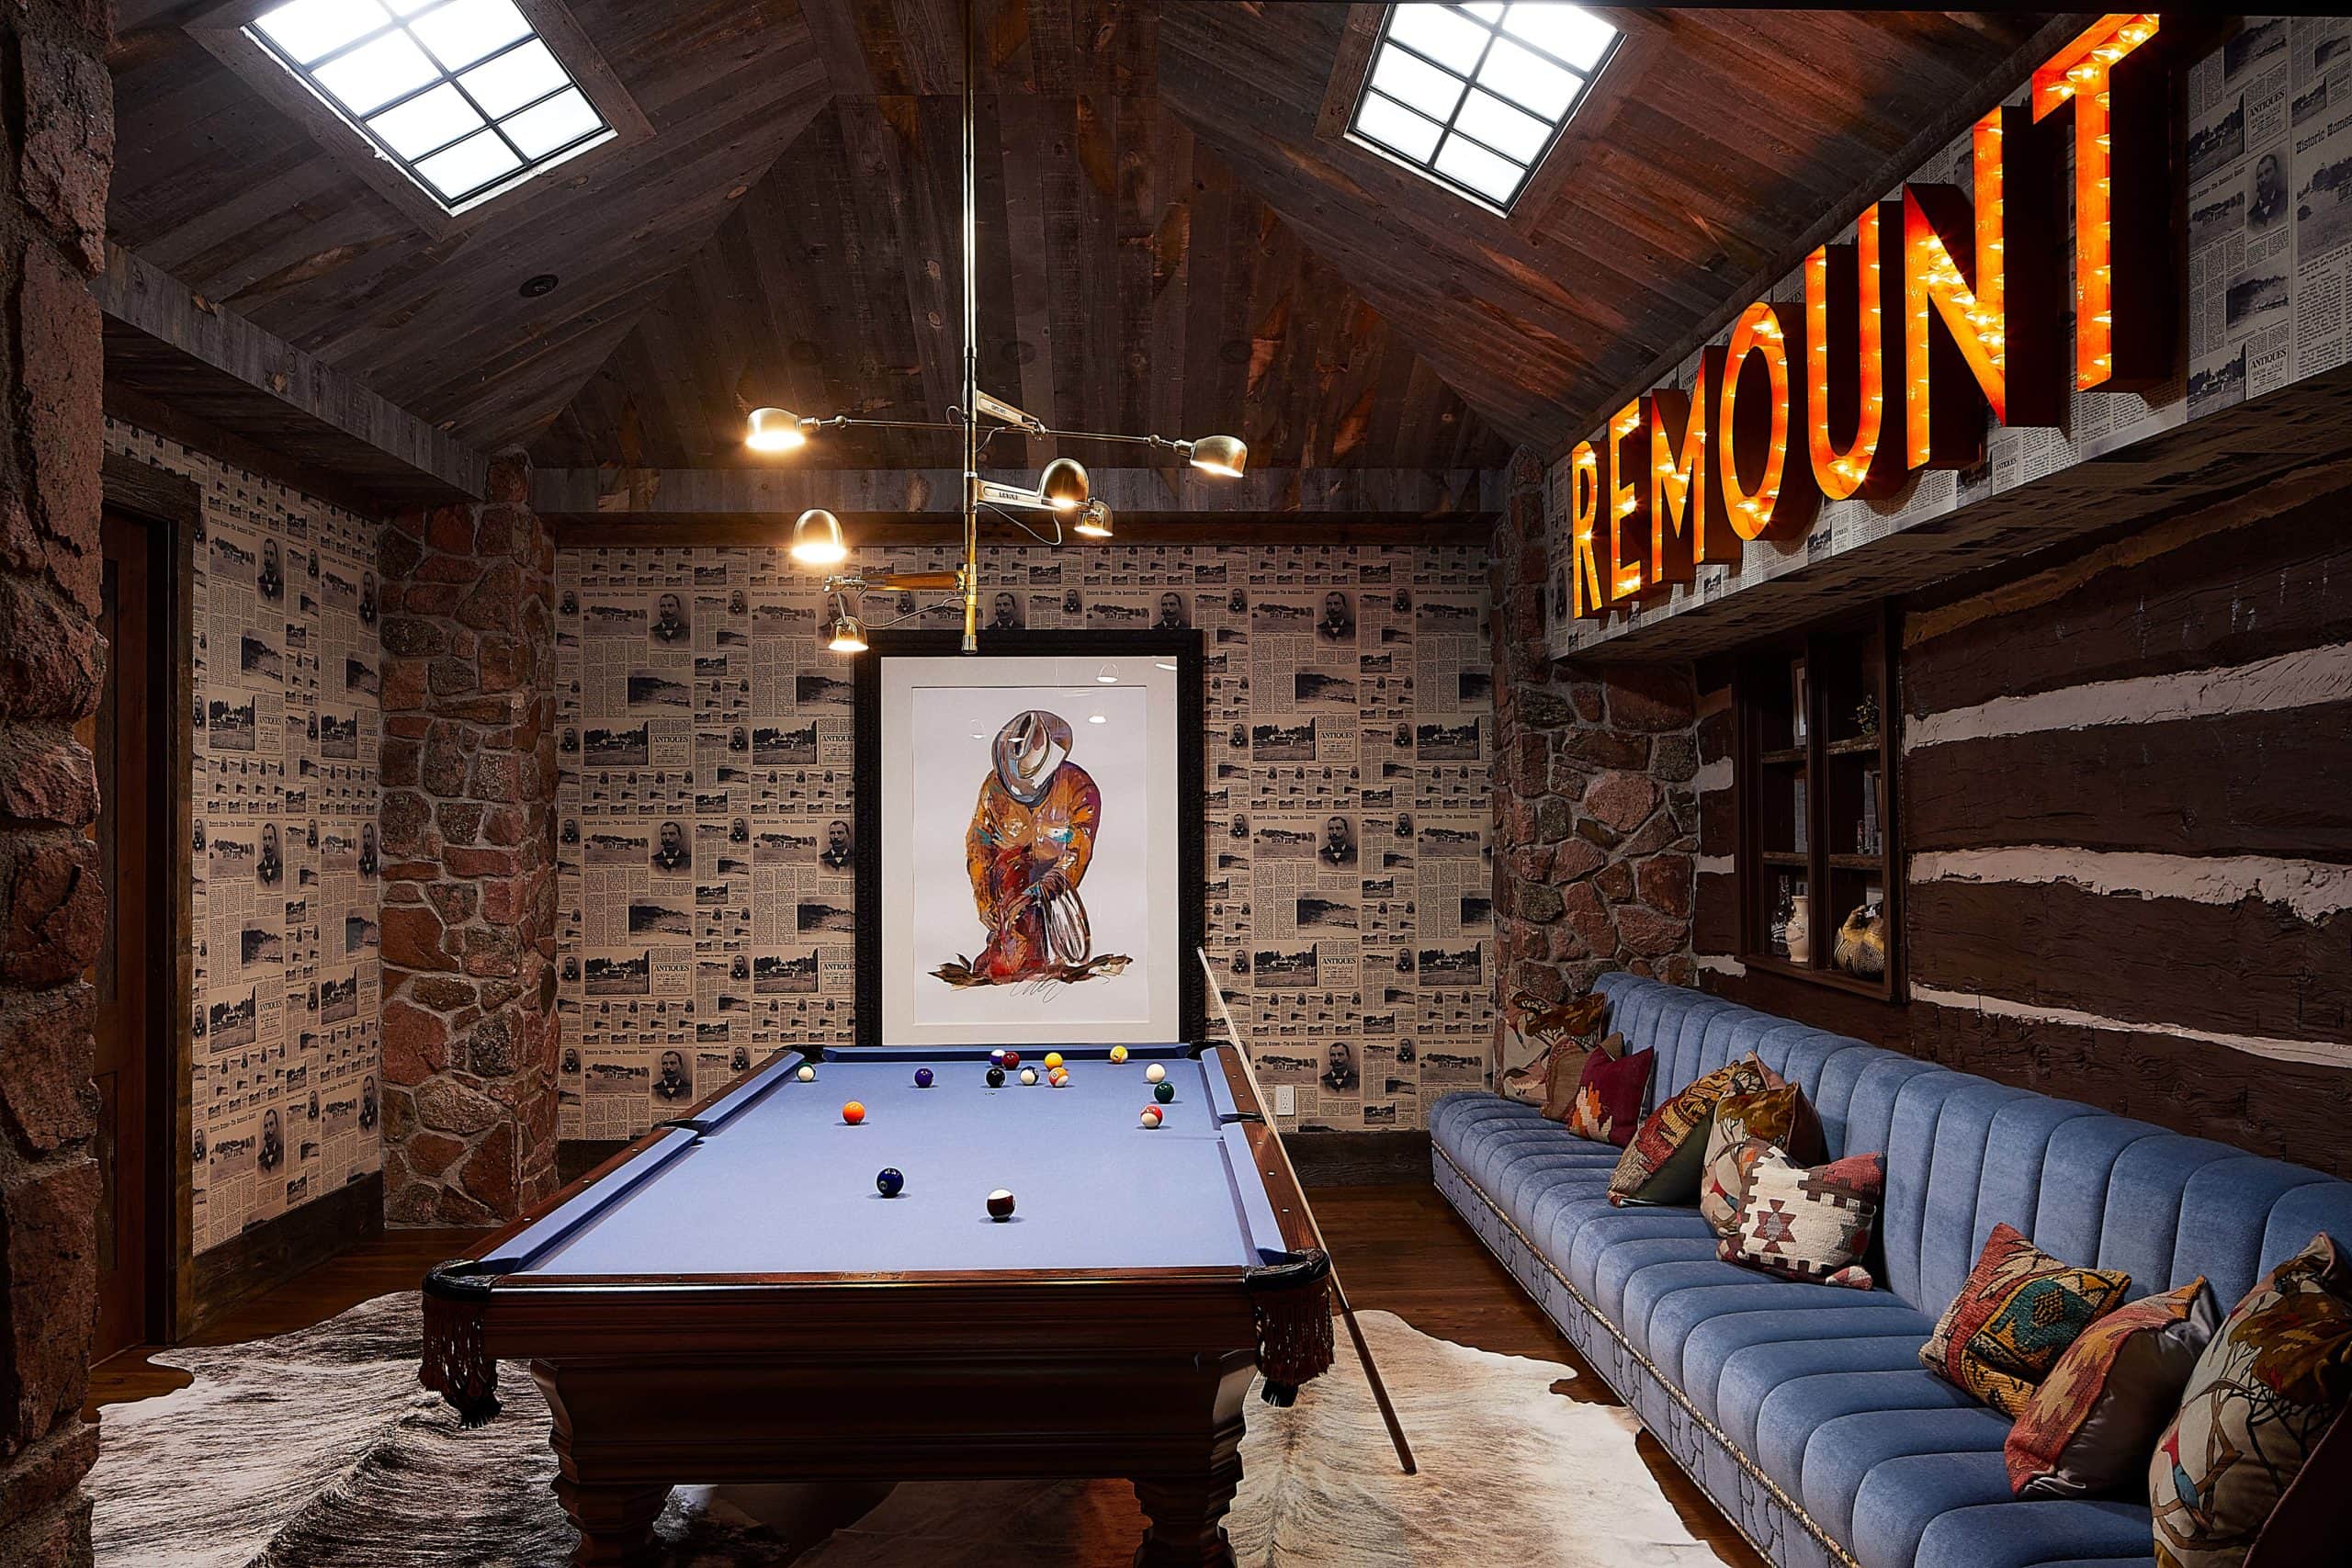 The billiards room with custom Remount Ranch wallpaper and vintage sign.